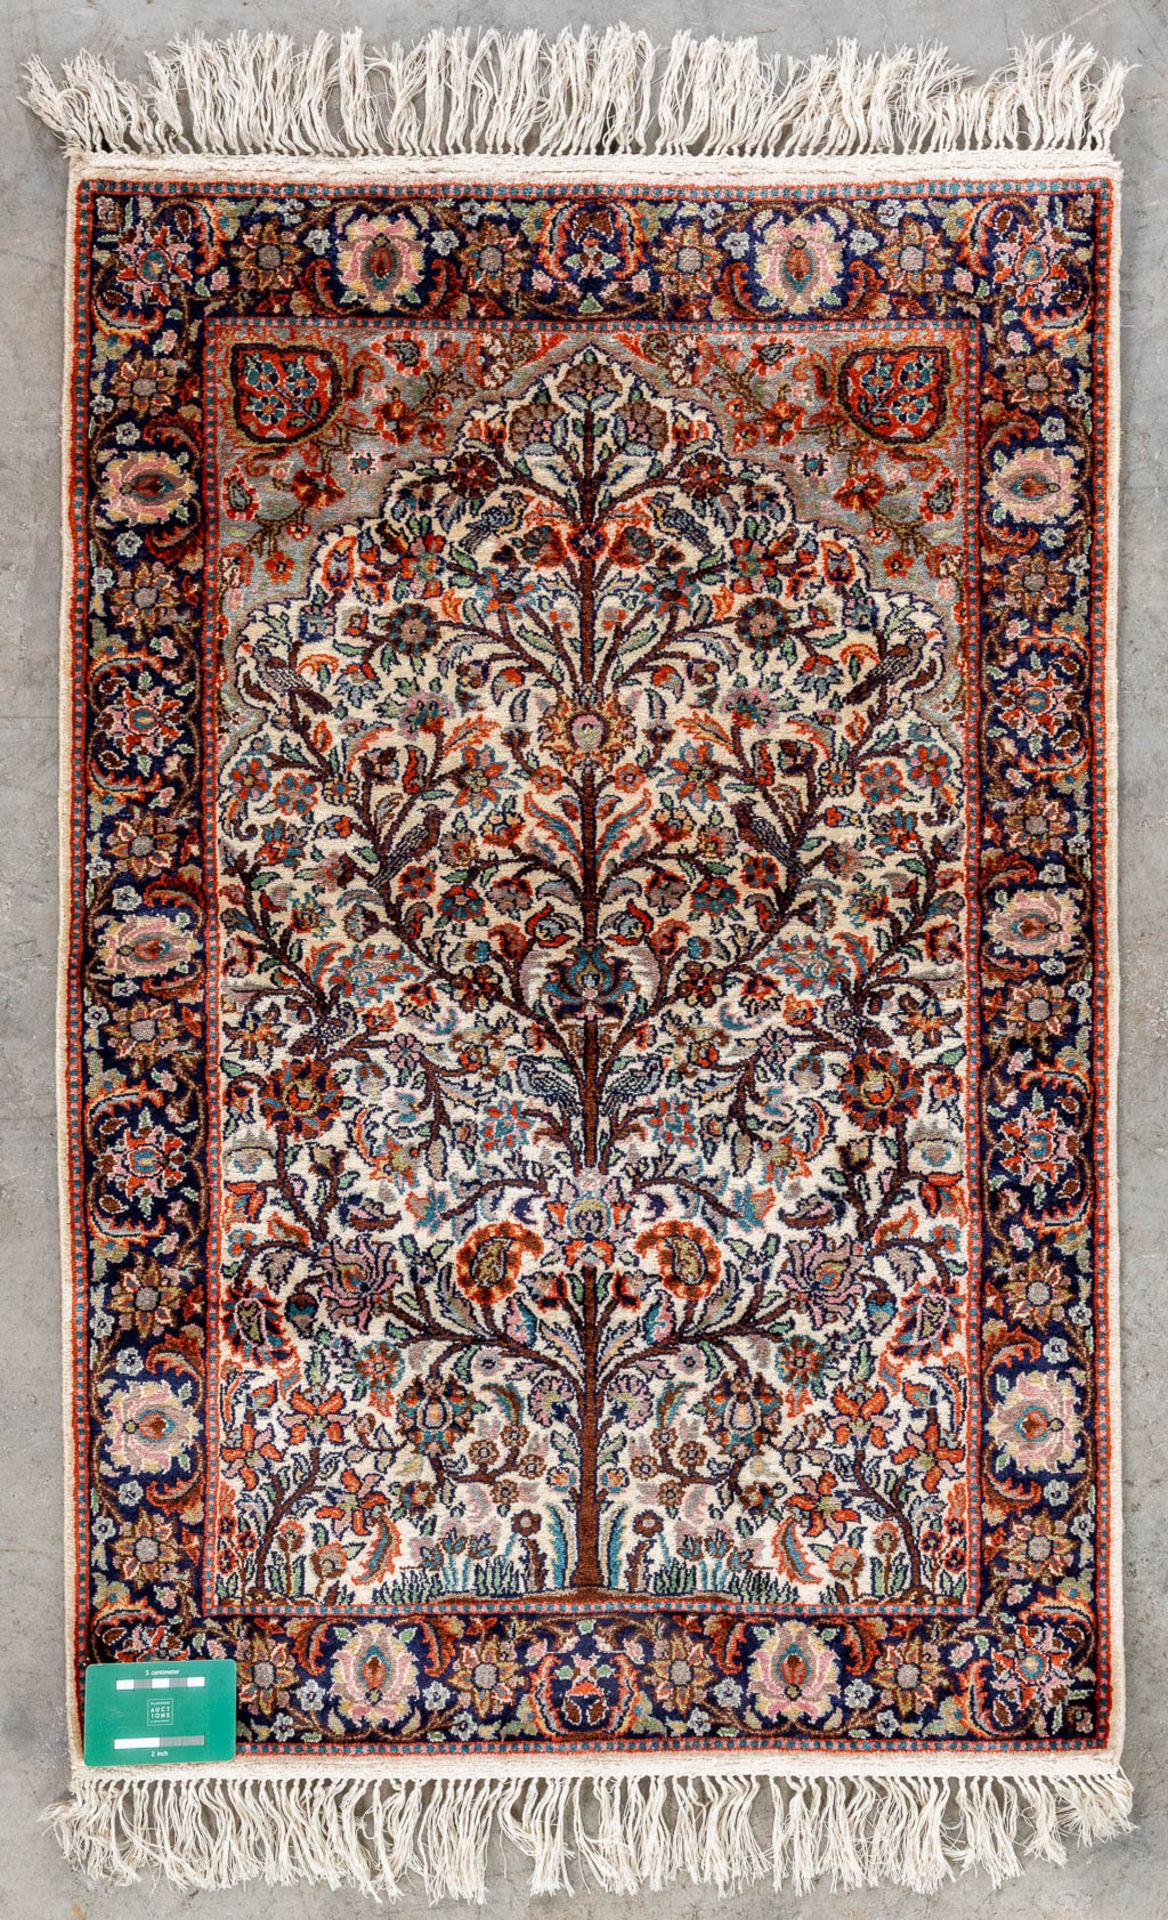 An oriental hand-made carpet made of silk, 'Tree Of Life', Kashmir. (L:60 x W:90 cm) - Image 6 of 6